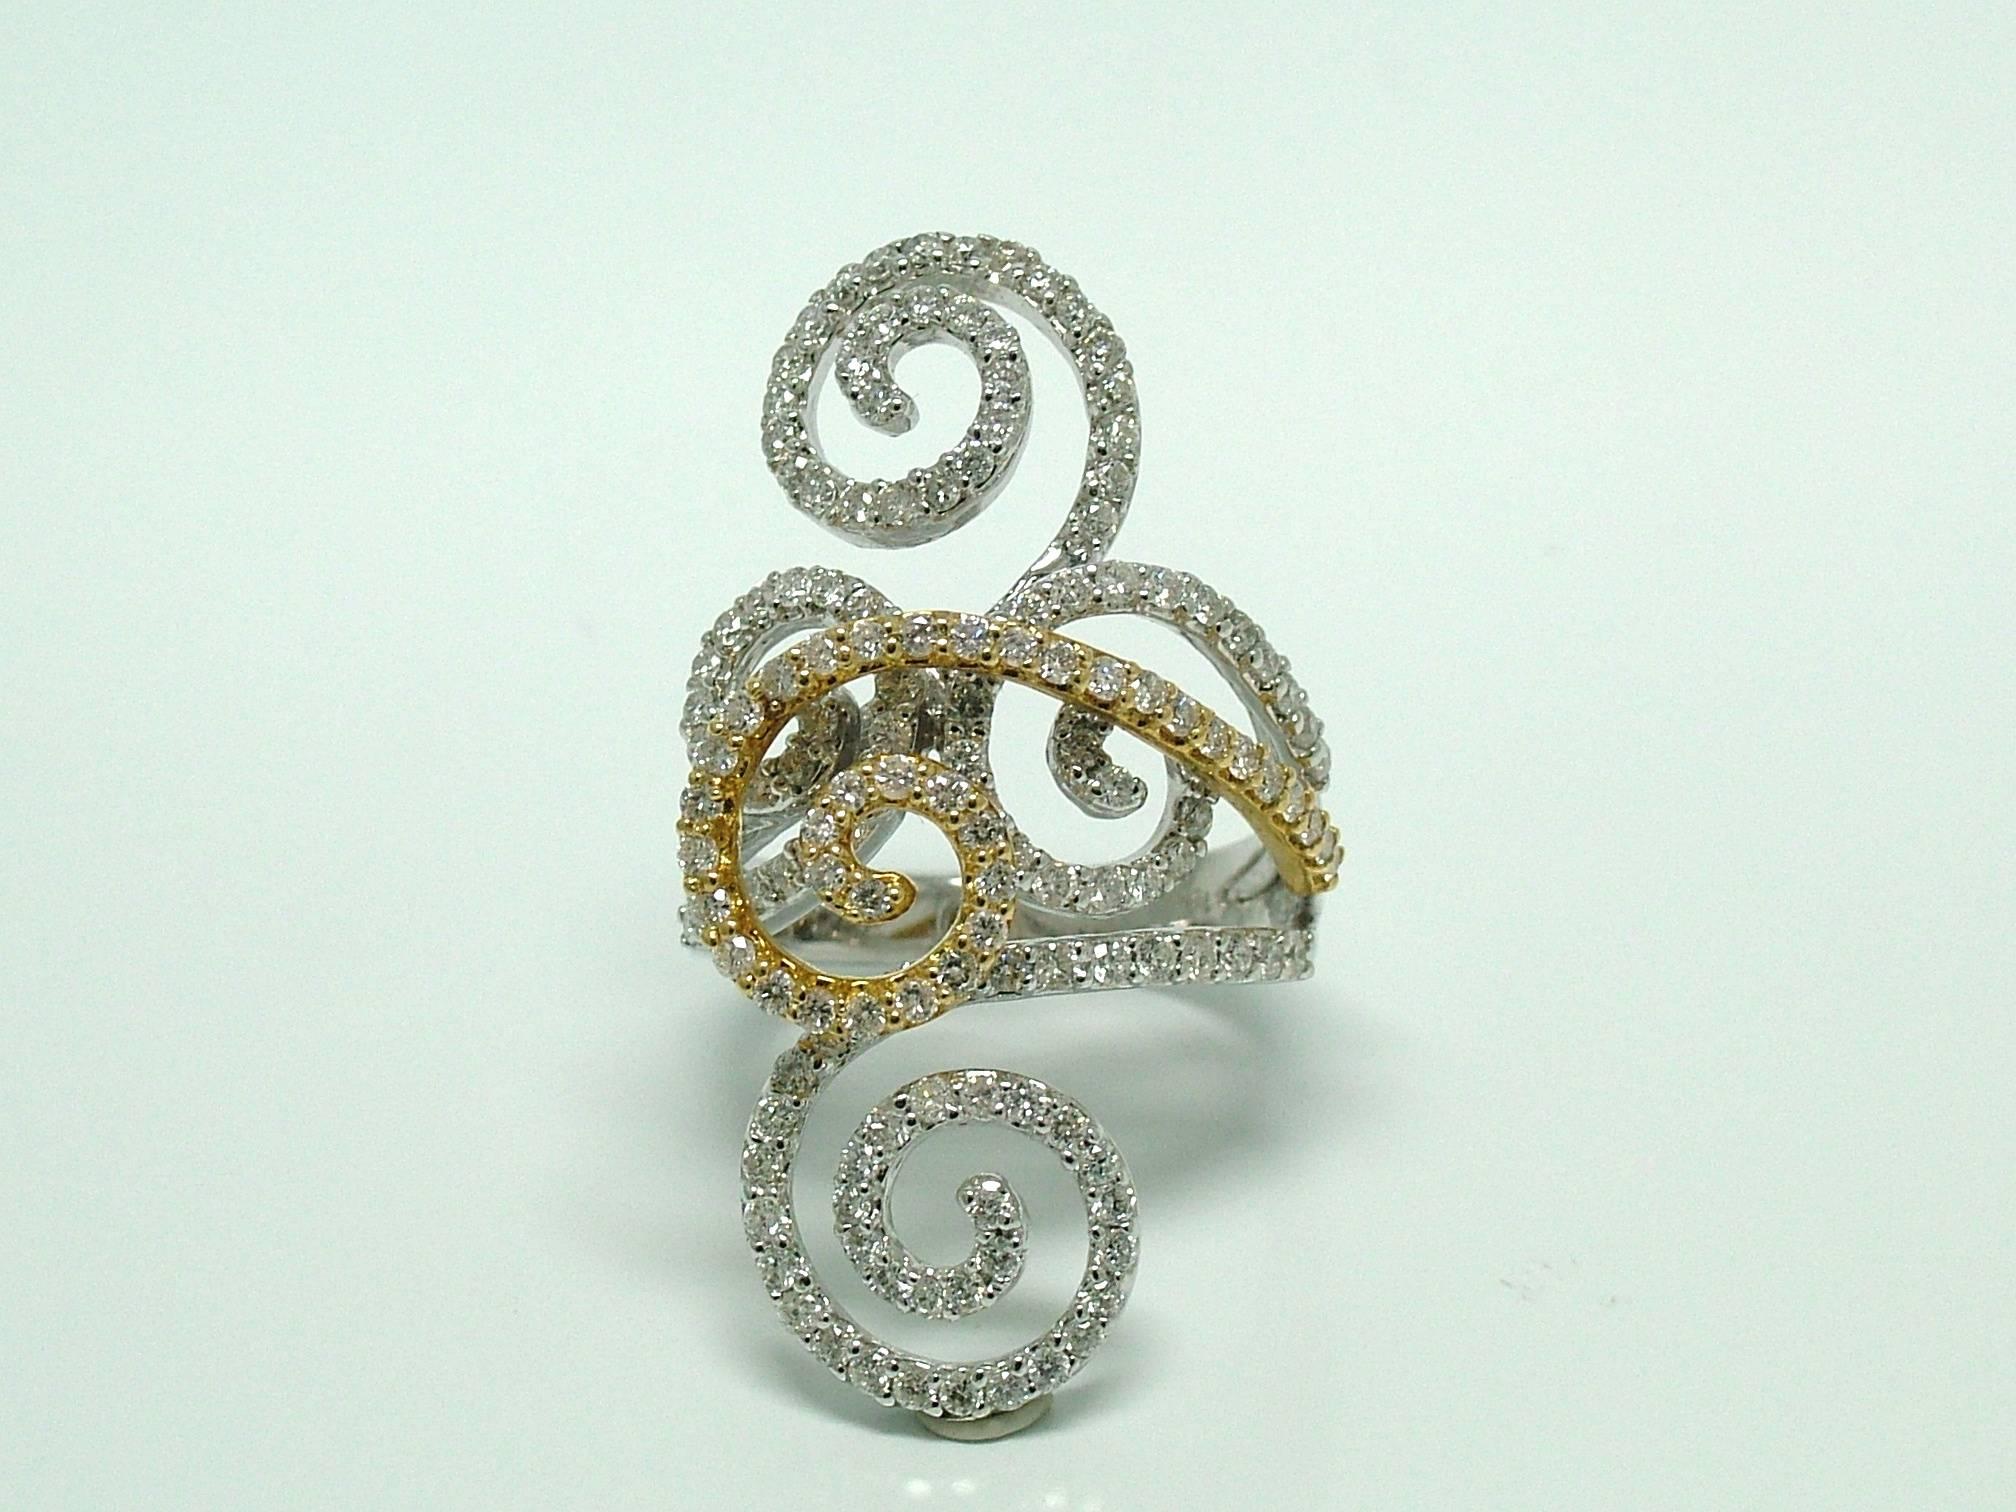 18 karat white and yellow gold ring set with brilliant cut diamonds weighting 1,80ct. The interesting shapes and curves seem to curl up like a delicate vine.

Finger size - 14 EU / 6¾- 6½ US / N - N½ UK
17.25mm inside diameter
Can be resized if